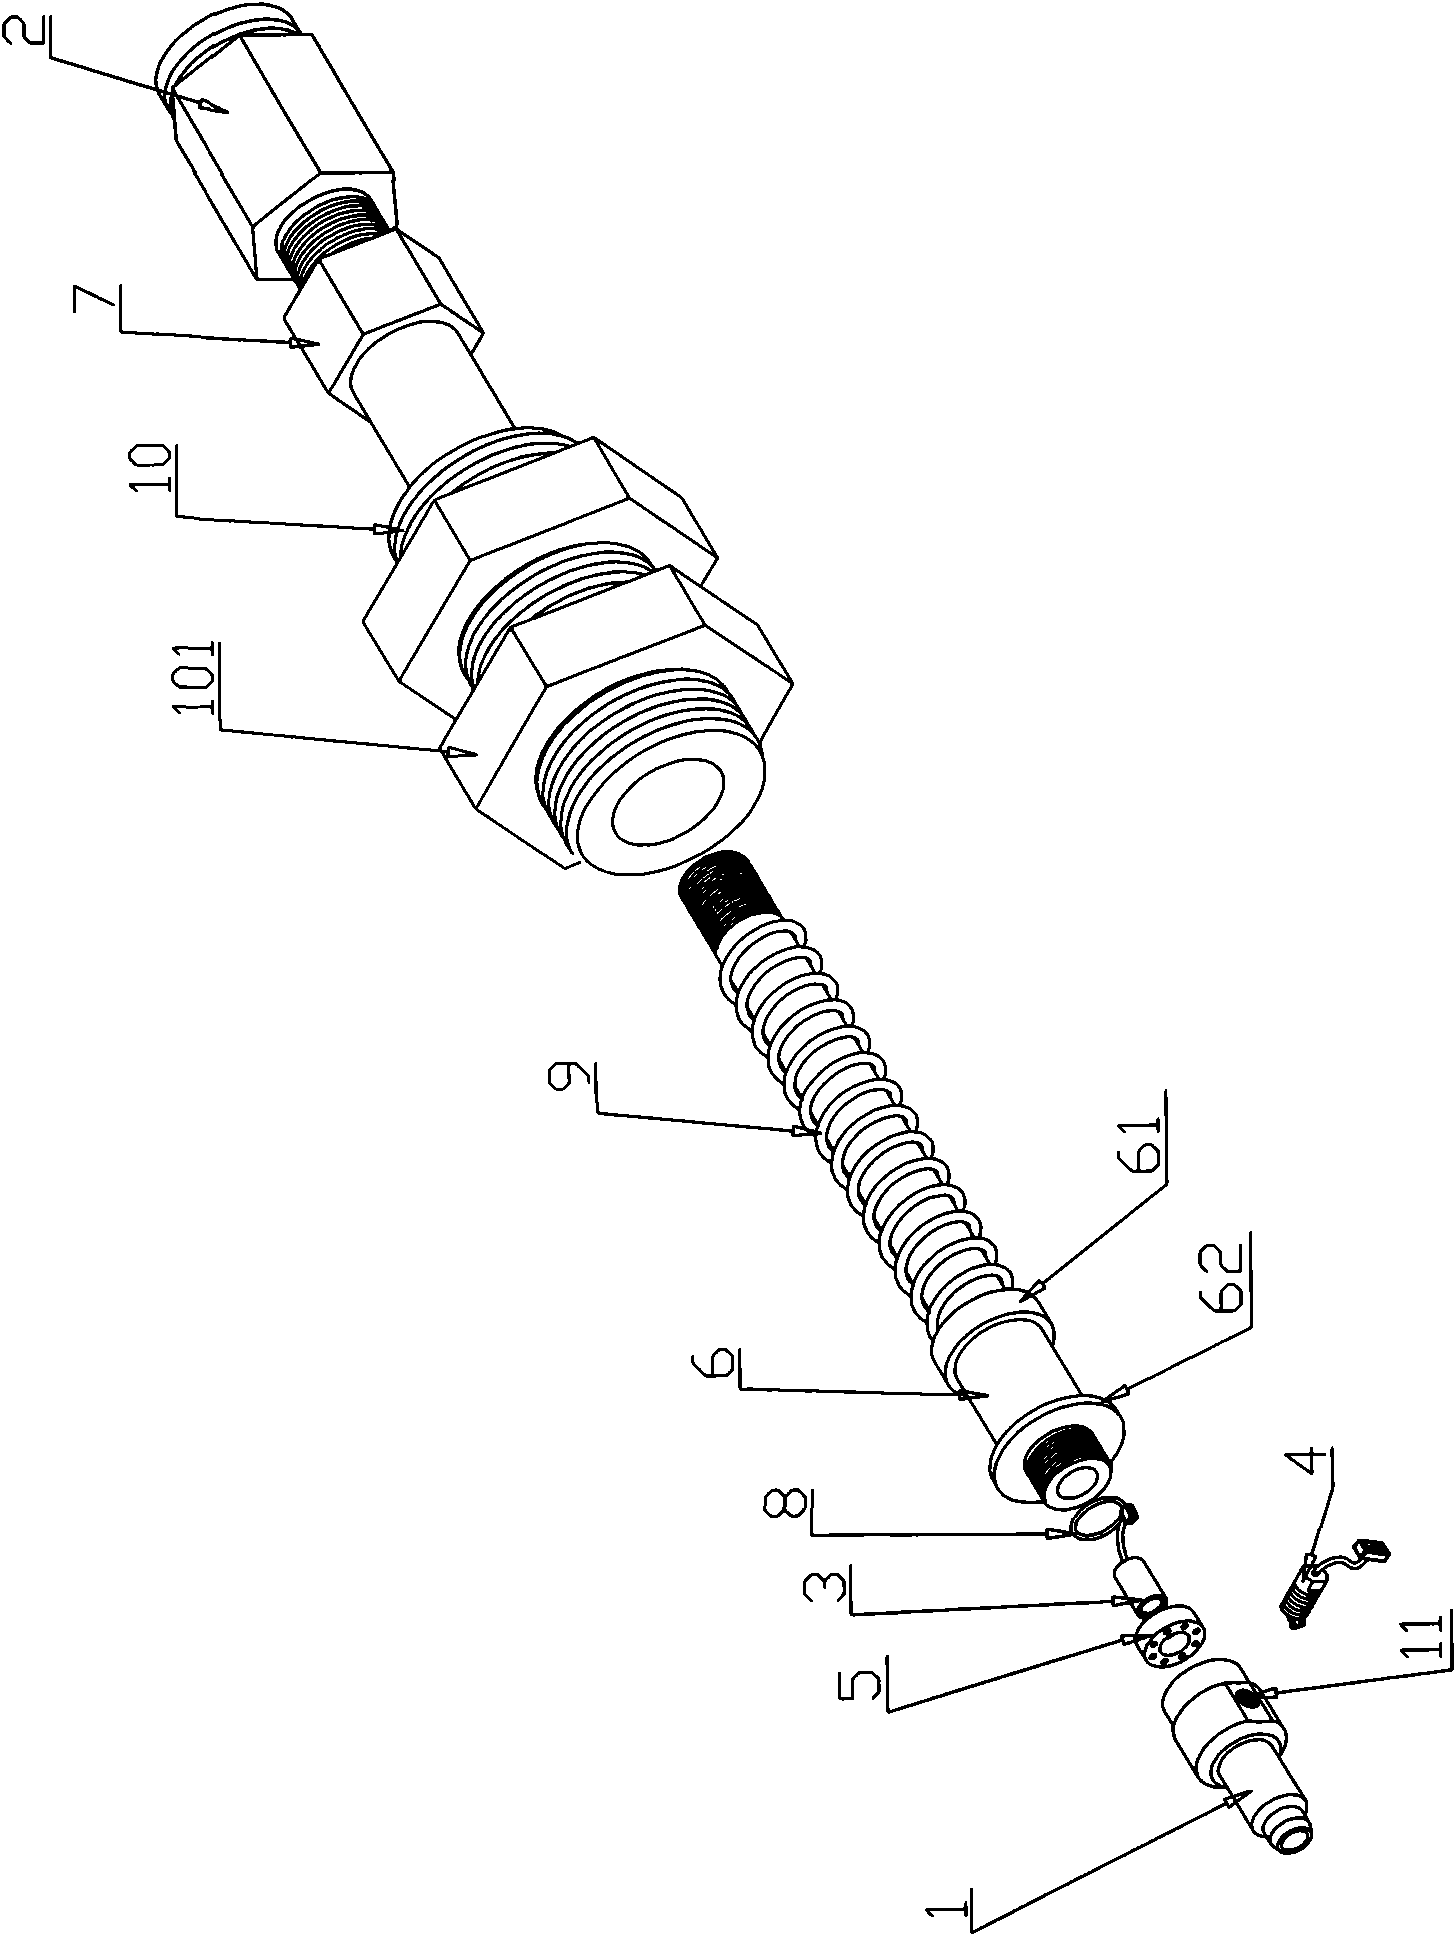 Suction nozzle structure with light source